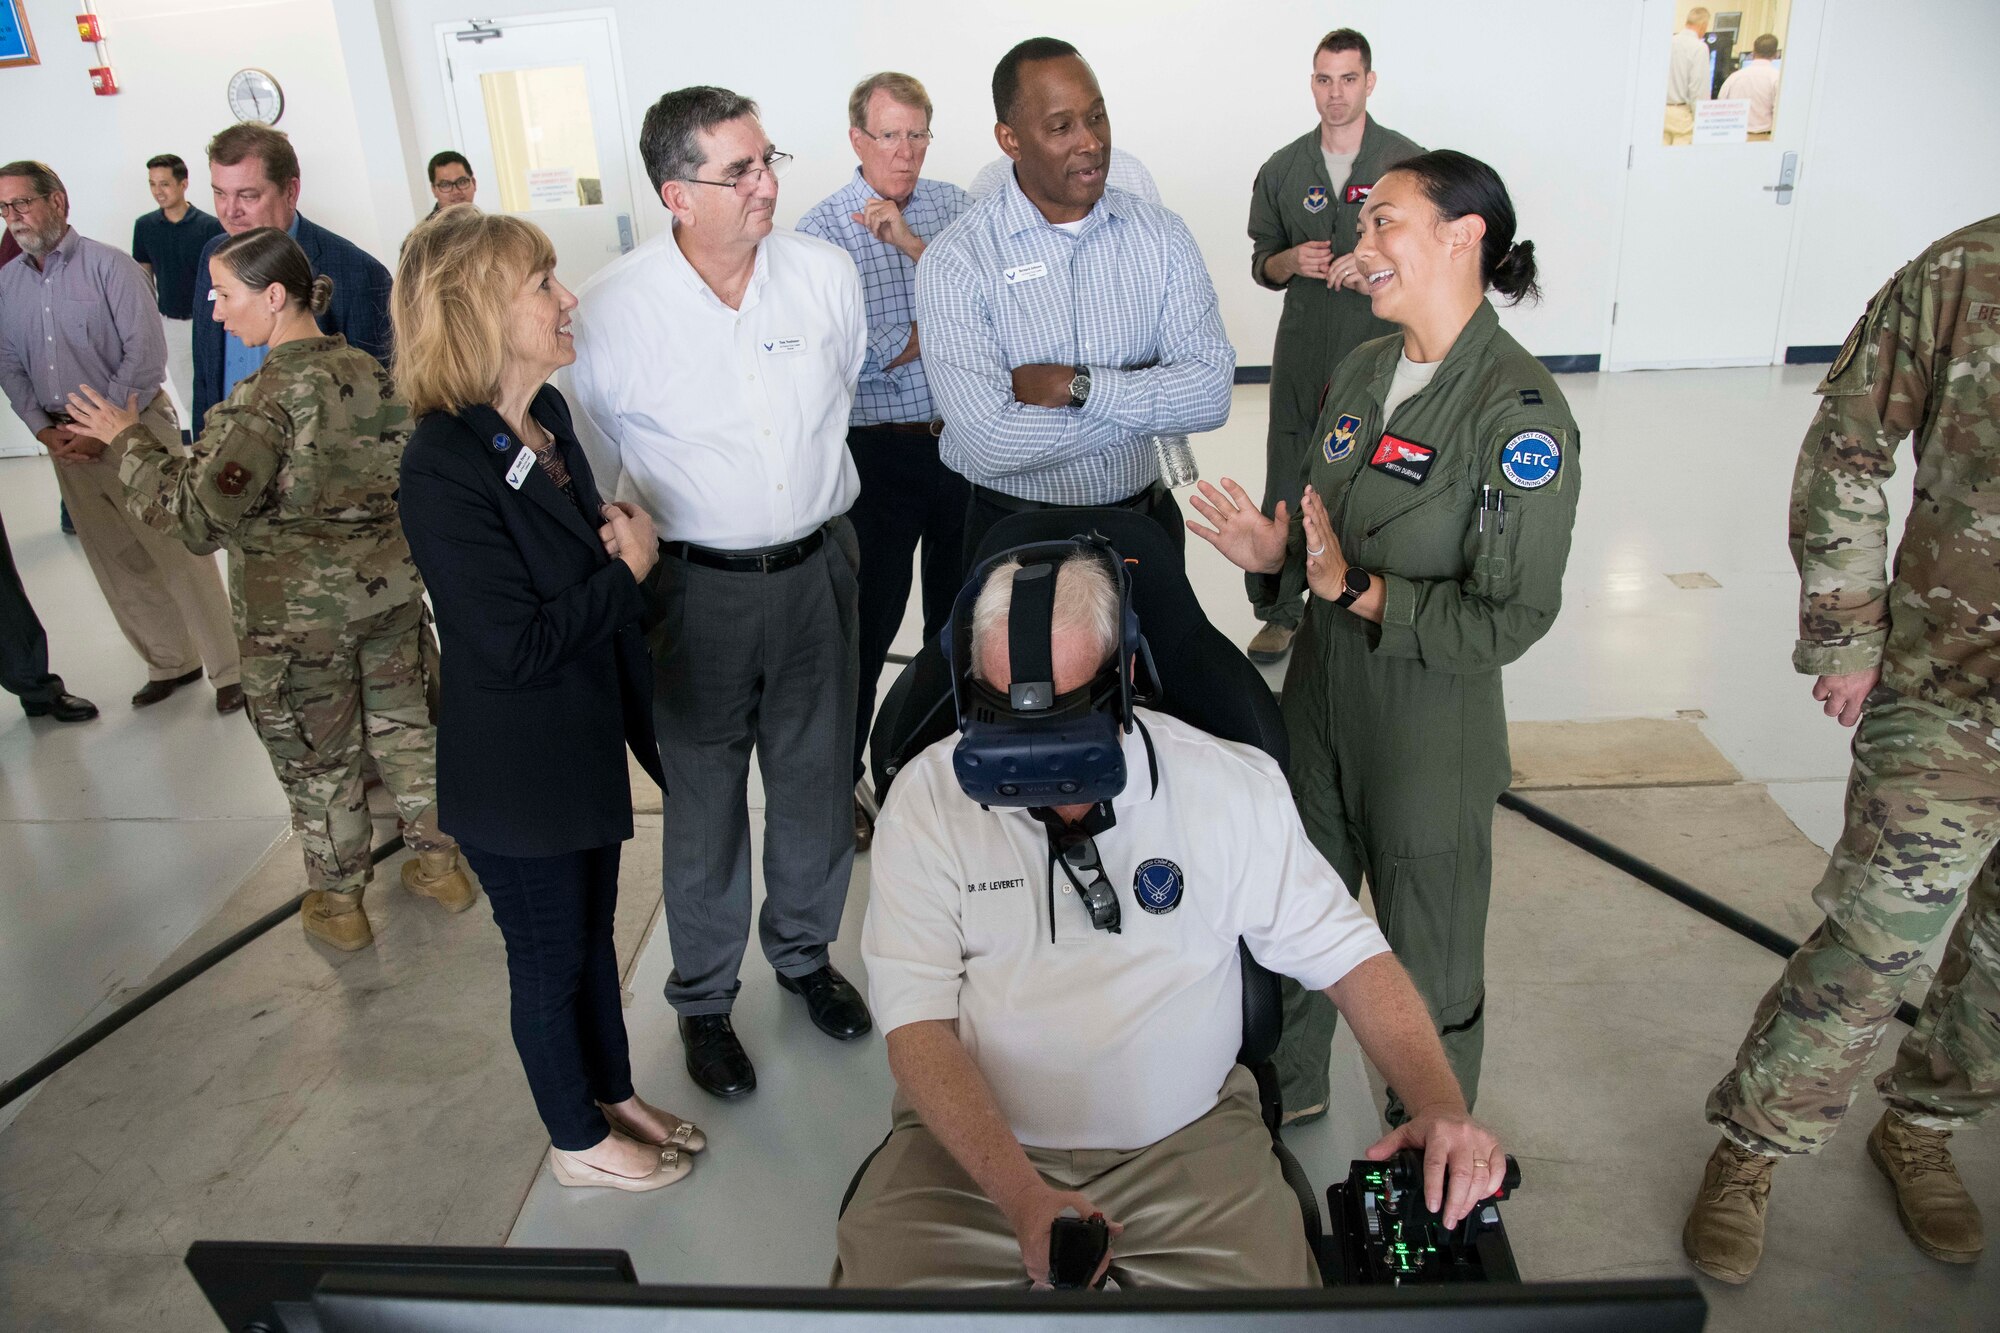 While Dr. Joe Leverett, an Air Education and Training Command civic leader from Altus, Oklahoma, uses the virtual reality system, U.S. Air Force Capt. Christine Durham, Detachment 24 instructor pilot, explains to other civic leaders about how the system is used to train Pilot Training Next students Nov. 6, 2019. During the visit, civic leaders toured missions of the 37th Training Wing, 12th Flying Training Wing, 502nd Air Base Wing and Air Force Recruiting Service, at Joint Base San Antonio. The Air Force Civic Leader Tour Program helps community leaders understand and advocate for the Air Force’s diverse missions.